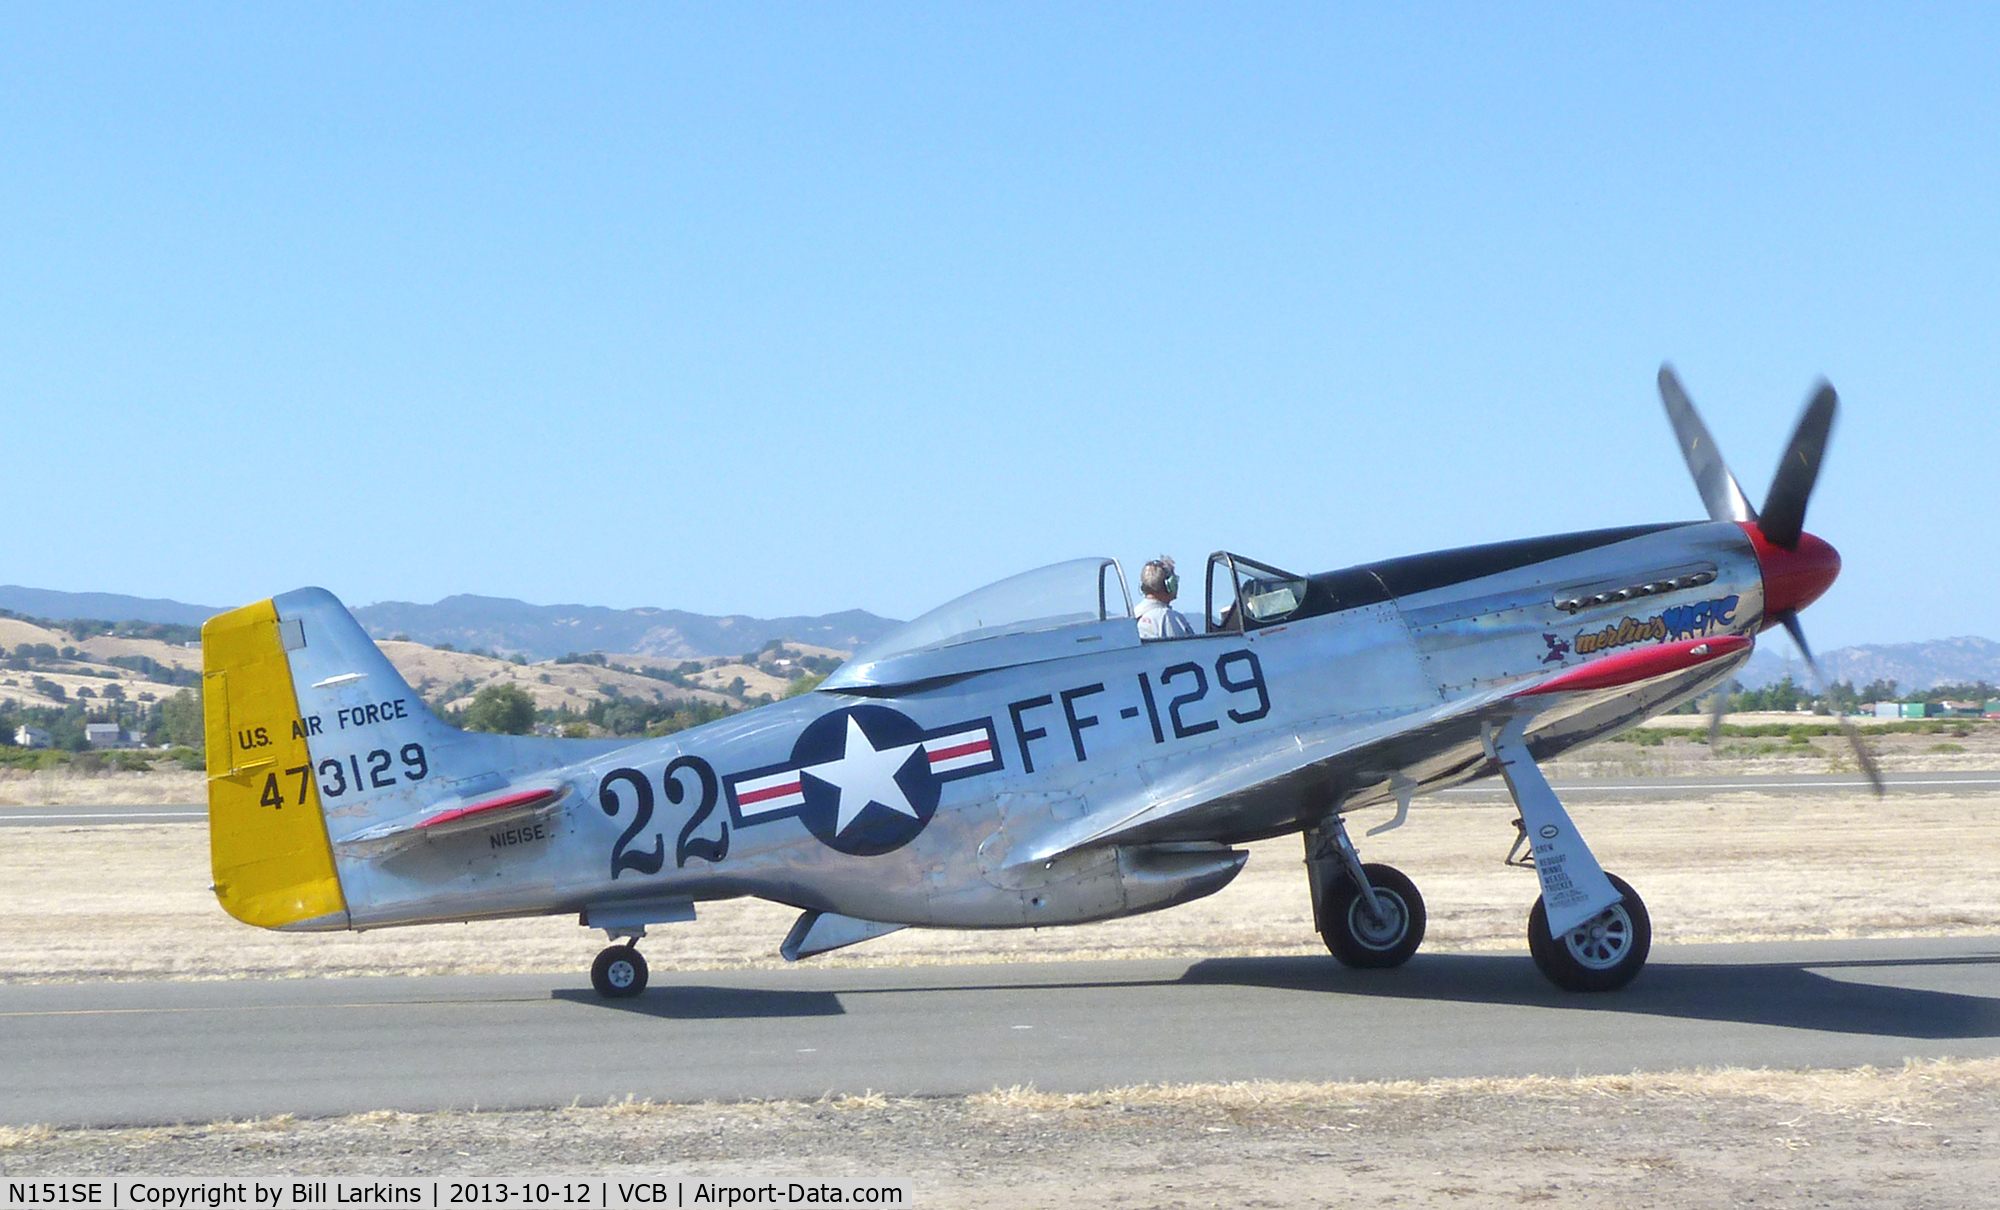 N151SE, 1944 North American P-51D Mustang C/N 122-39588 (44-73129), Leaving the Nut Tree at the end of Mustang Day.